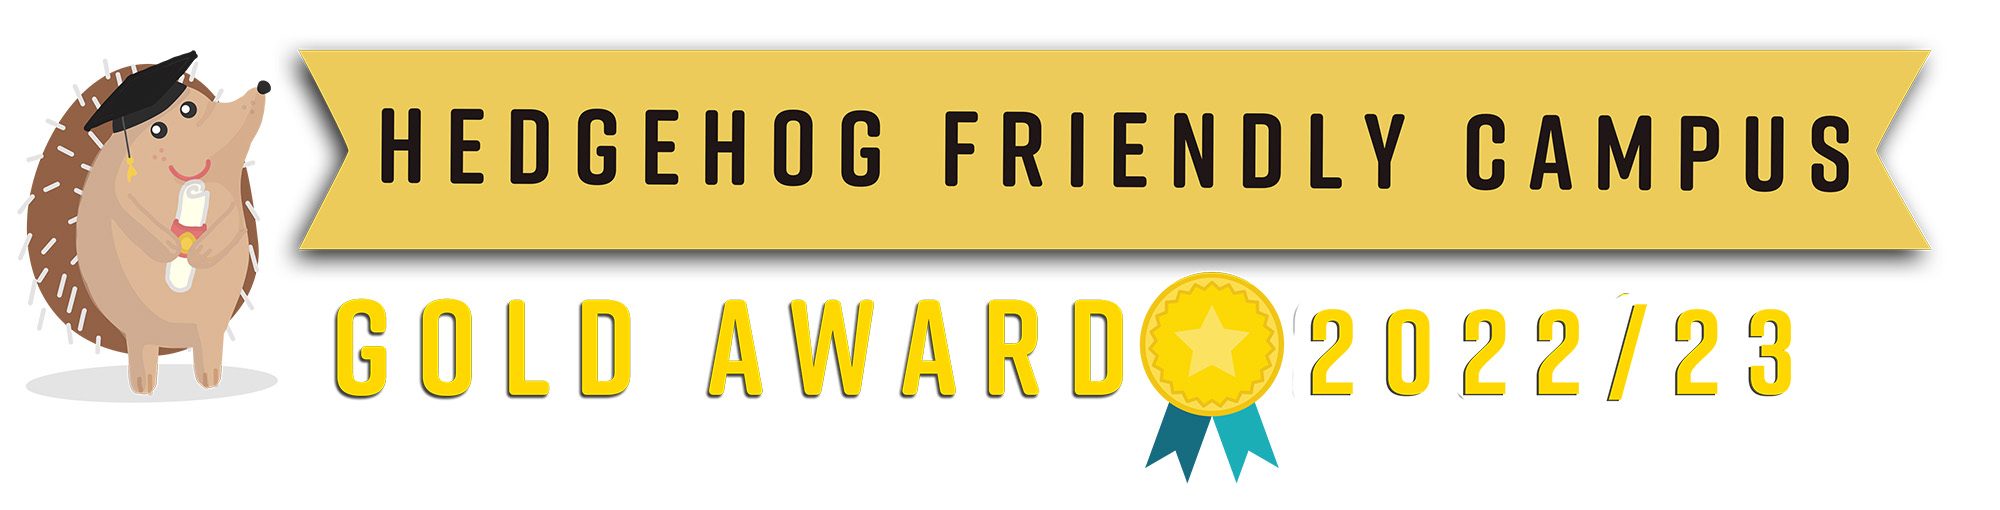 Banner with the words Hedgehog Friendly Campus Gold Award 2022/23